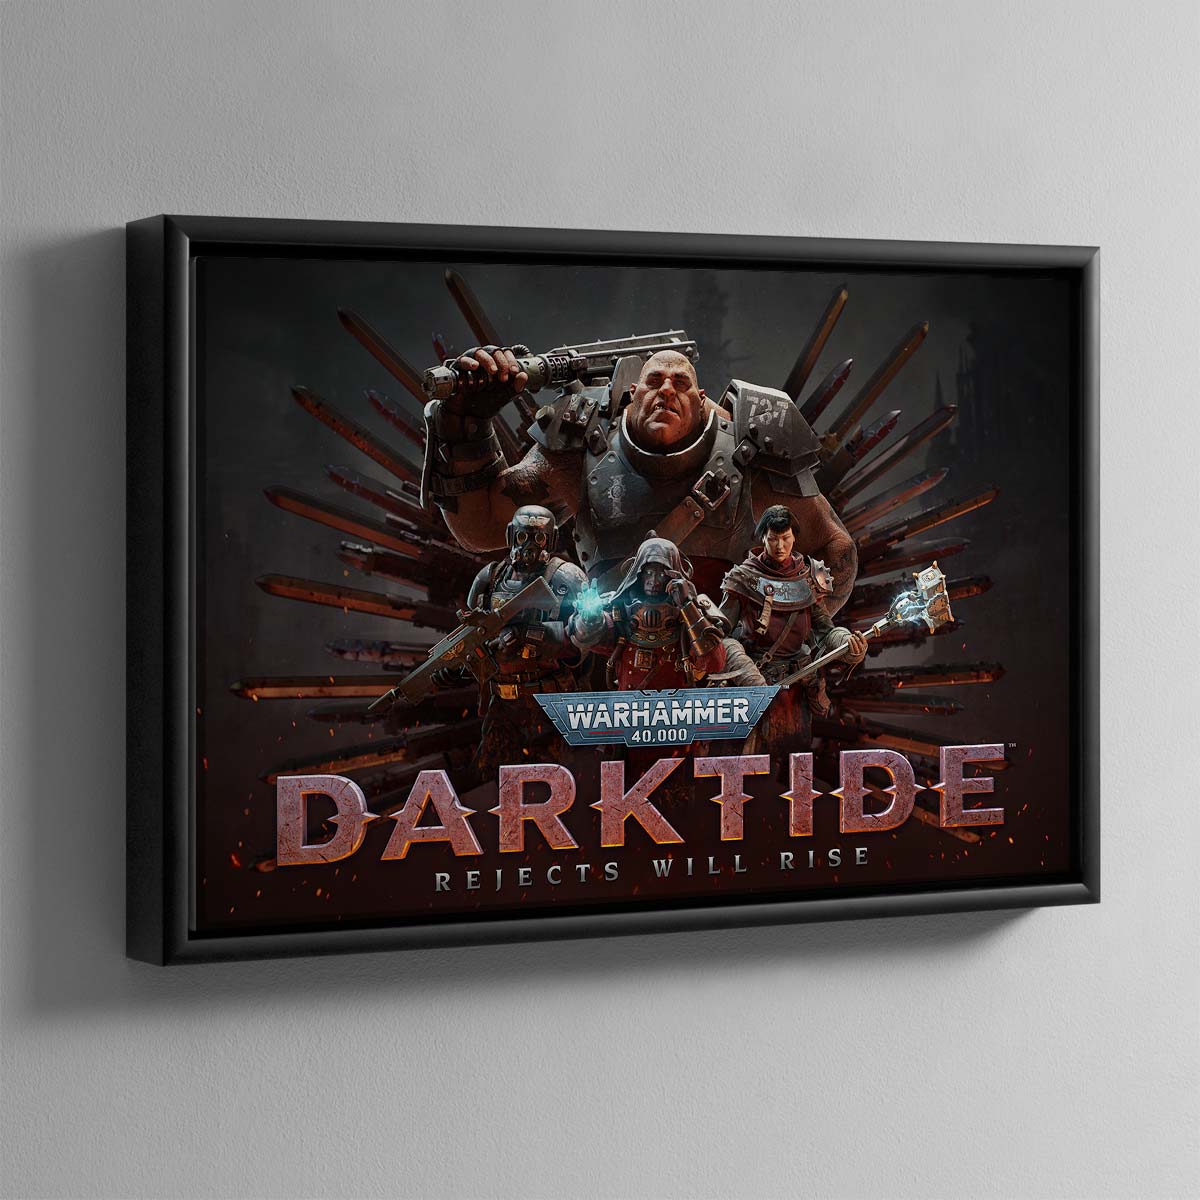 Darktide Rejects Will Rise – Framed Canvas